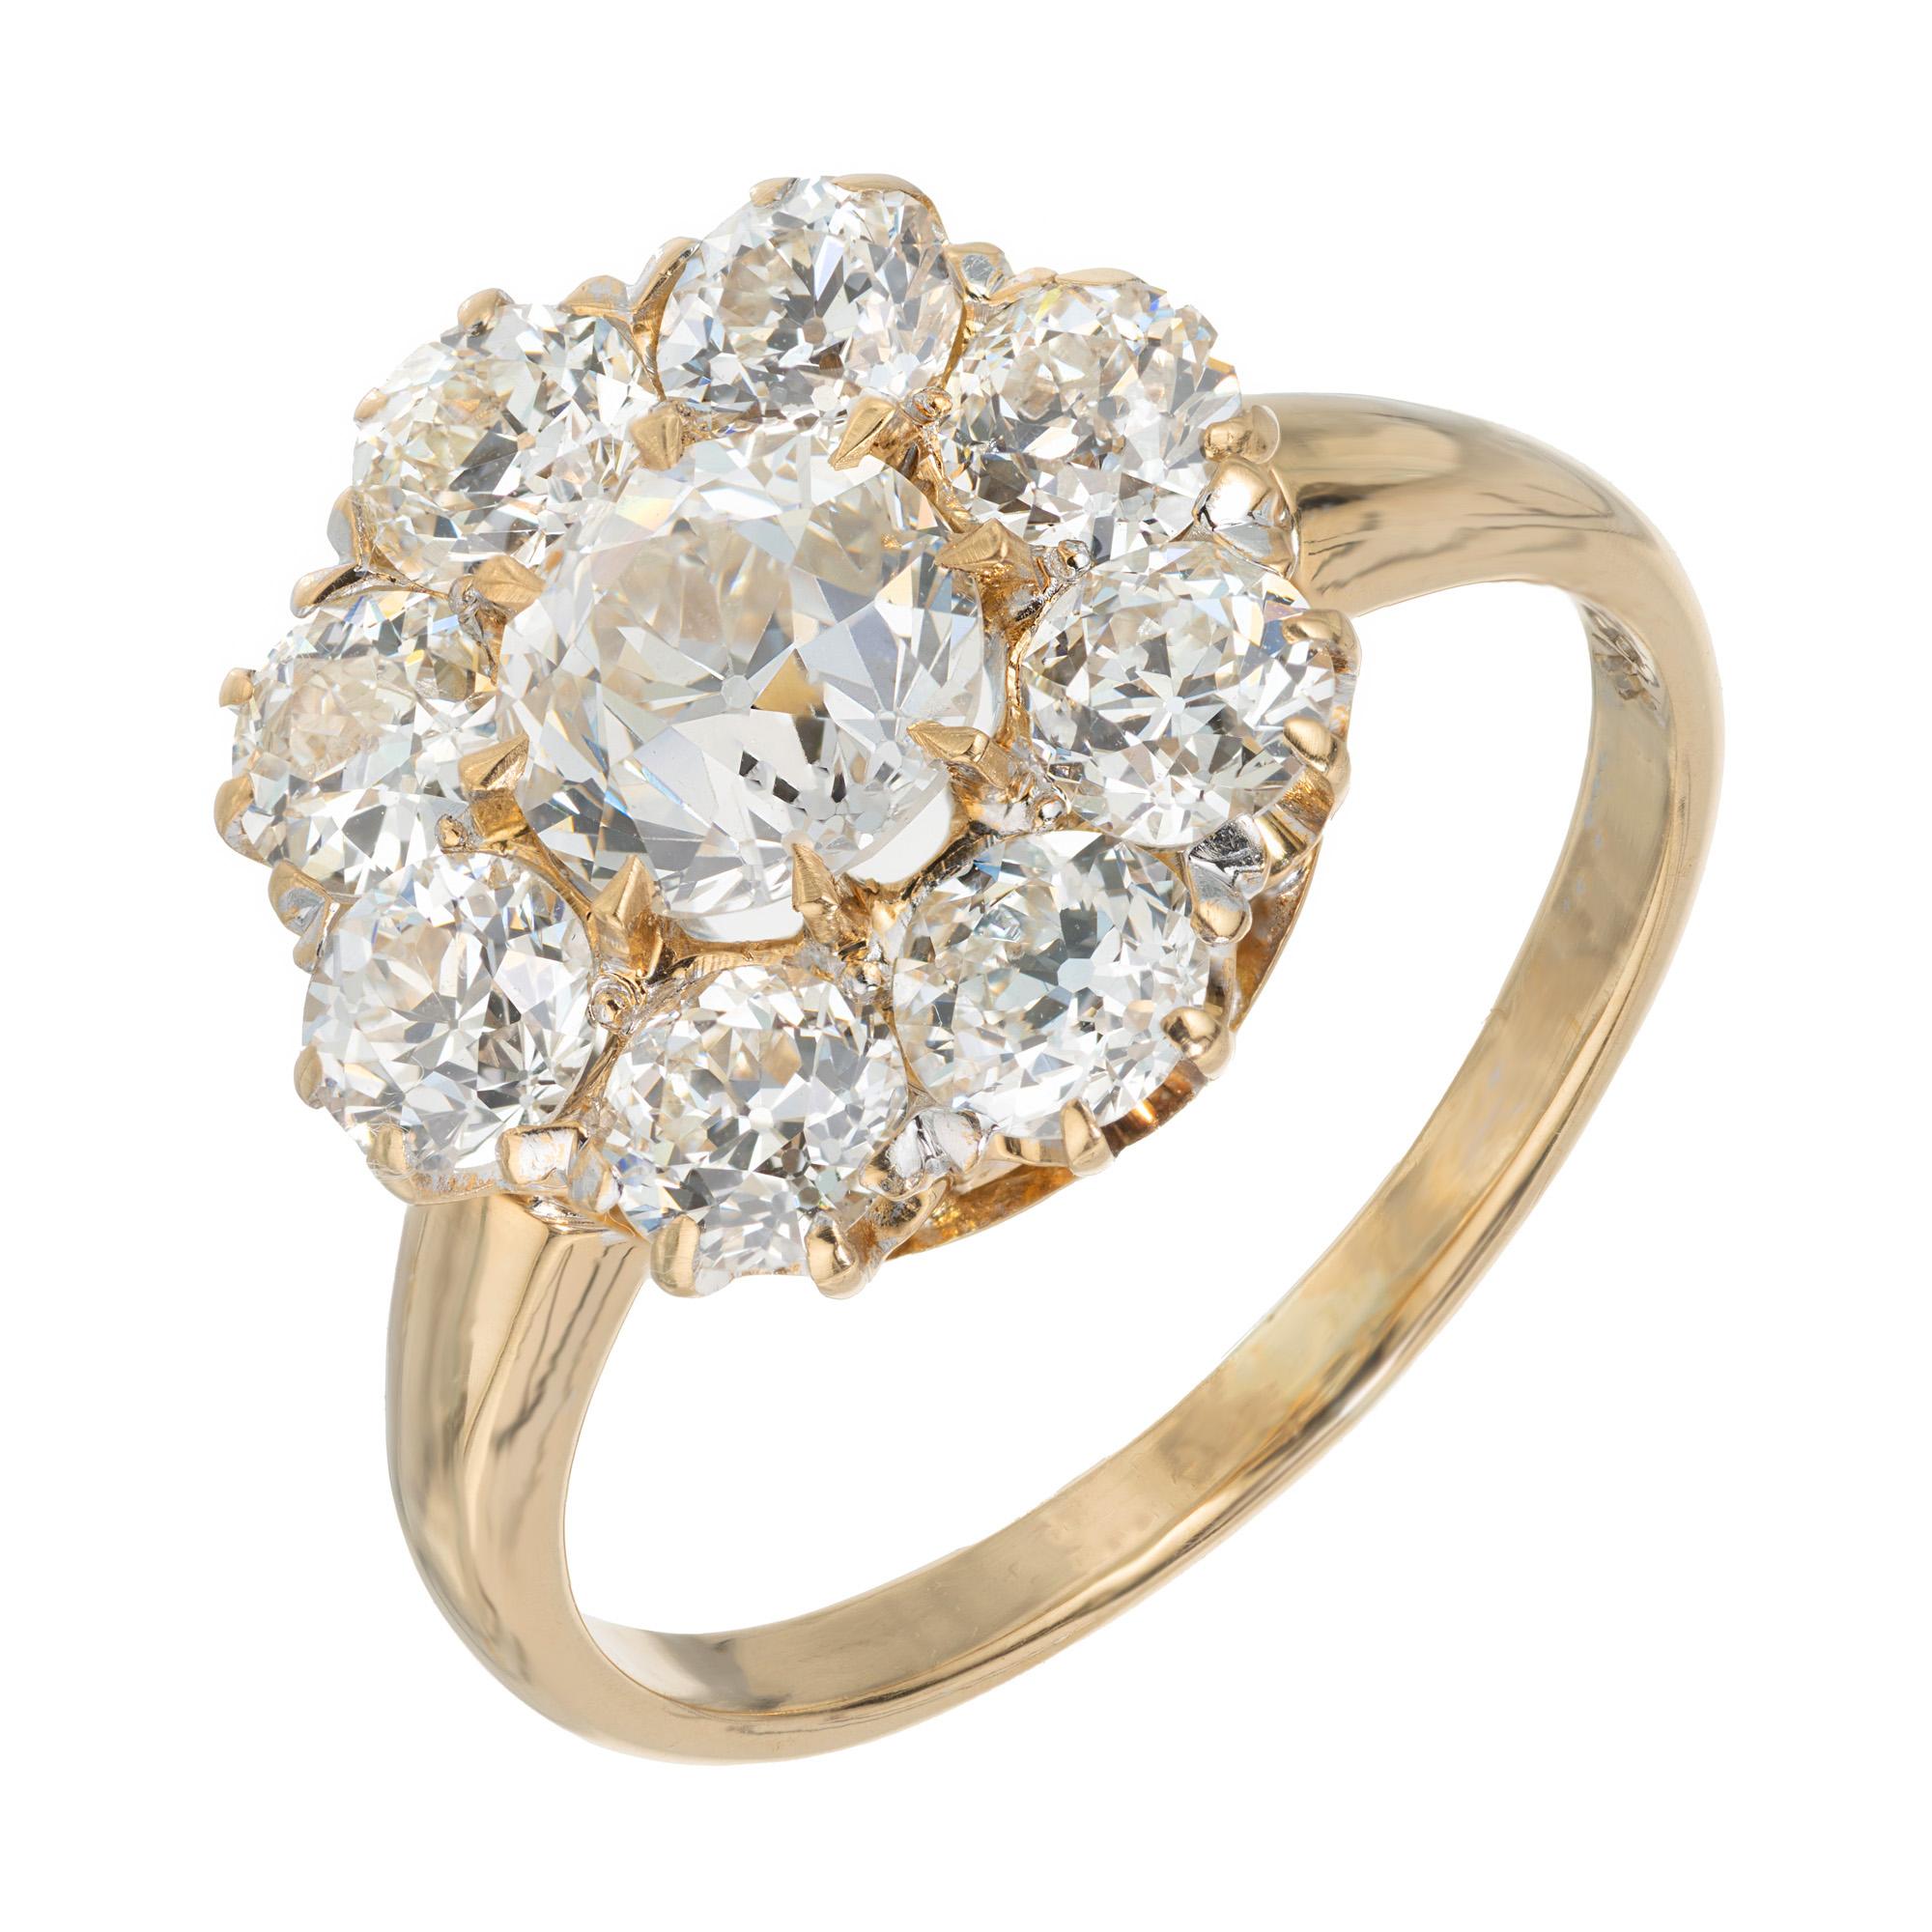 Art Deco diamond engagement ring. GIA certified .87ct Old European cut center stone with a halo of 8 Old European cut diamonds in its original 18k yellow gold cluster ring setting. This ring captures the embodiment of the Art Deco era.

1 Old Euro